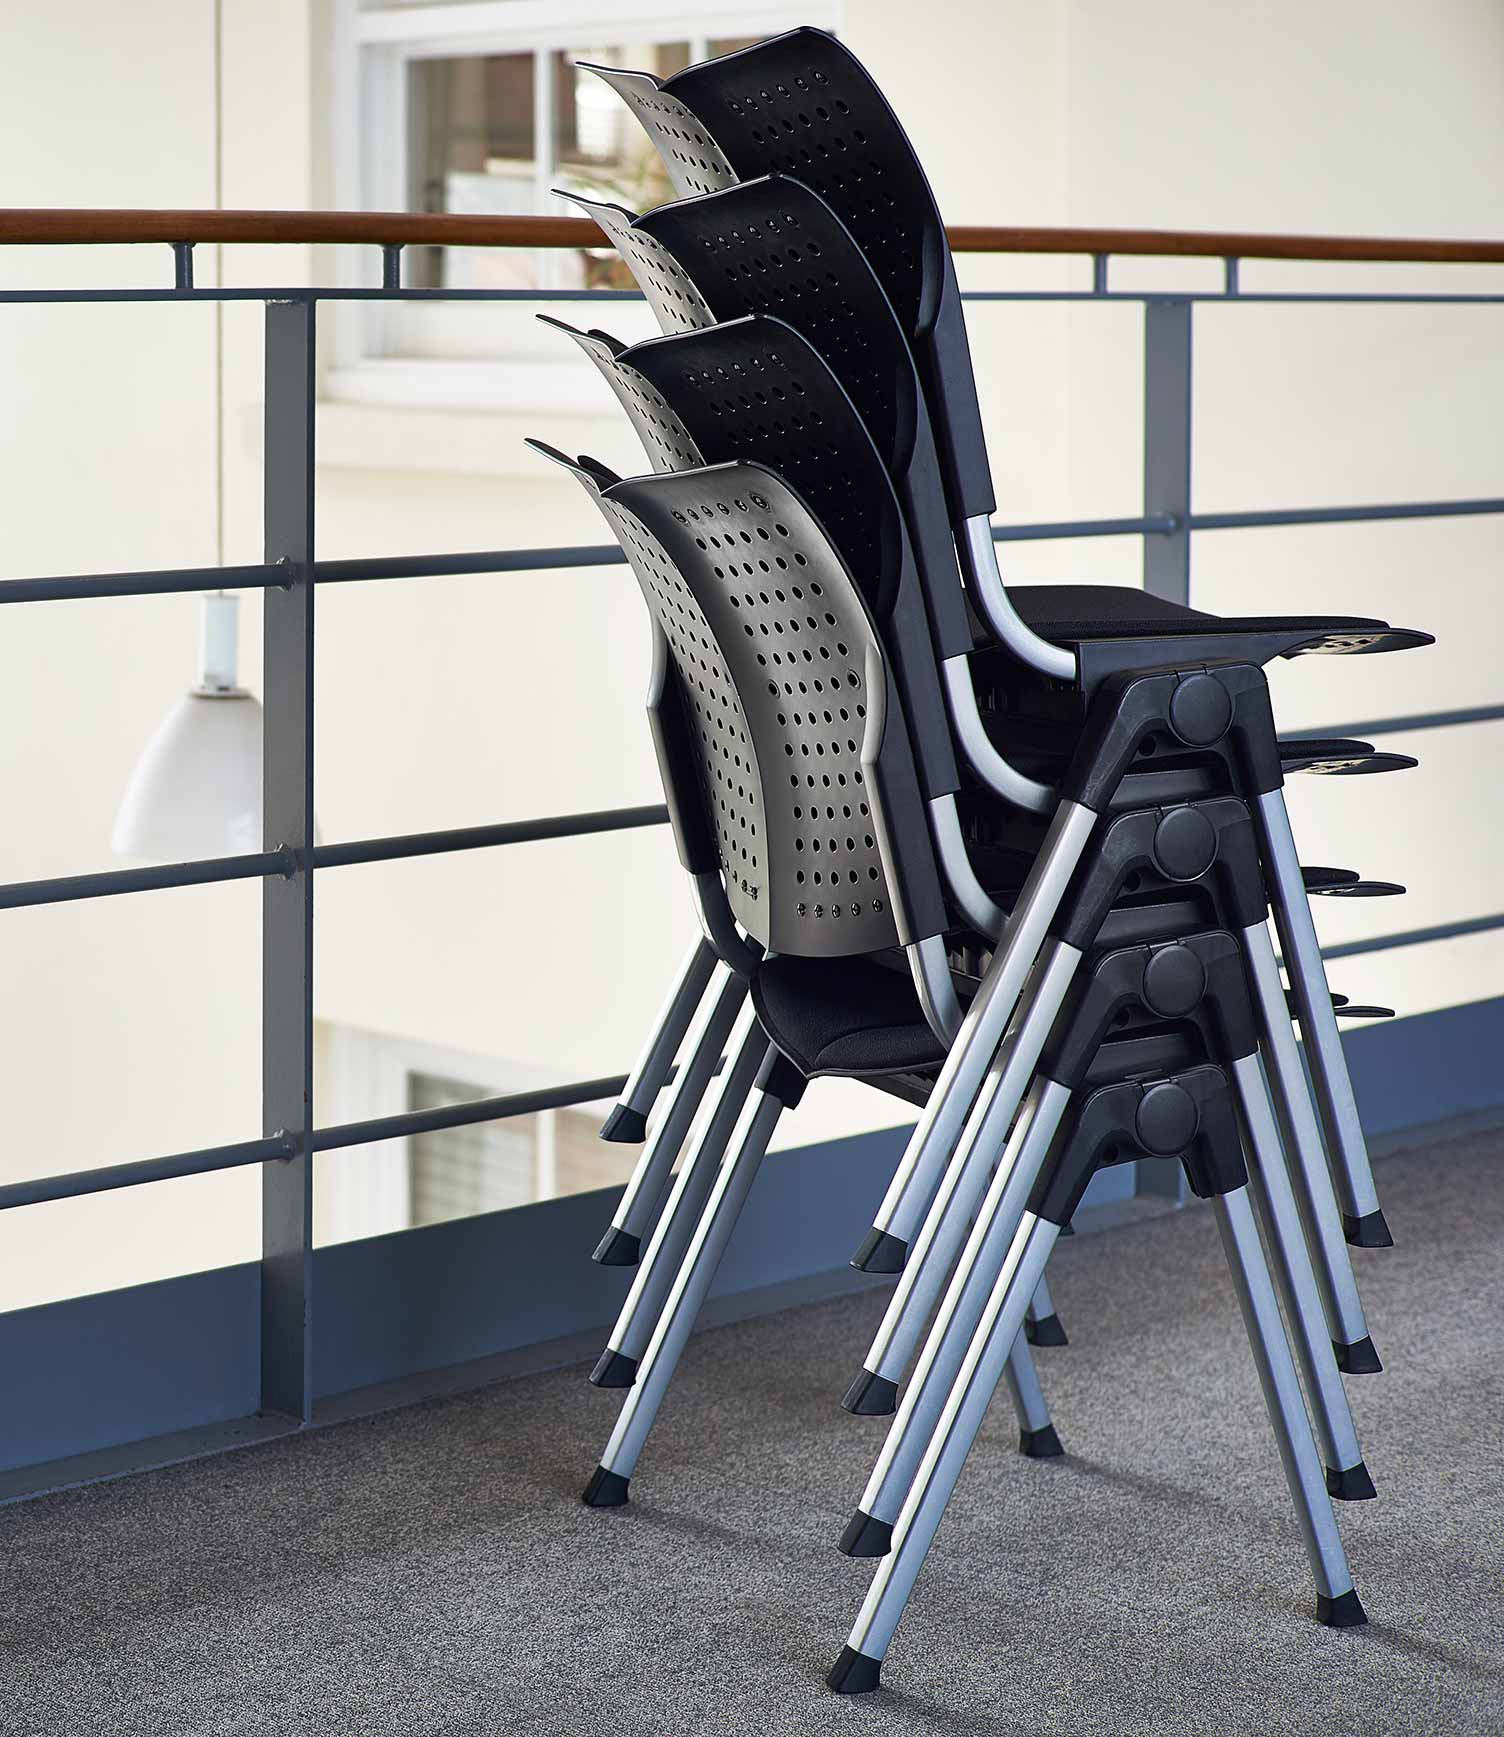 Stackable chairs HÅG Contino wing in black in university classroom